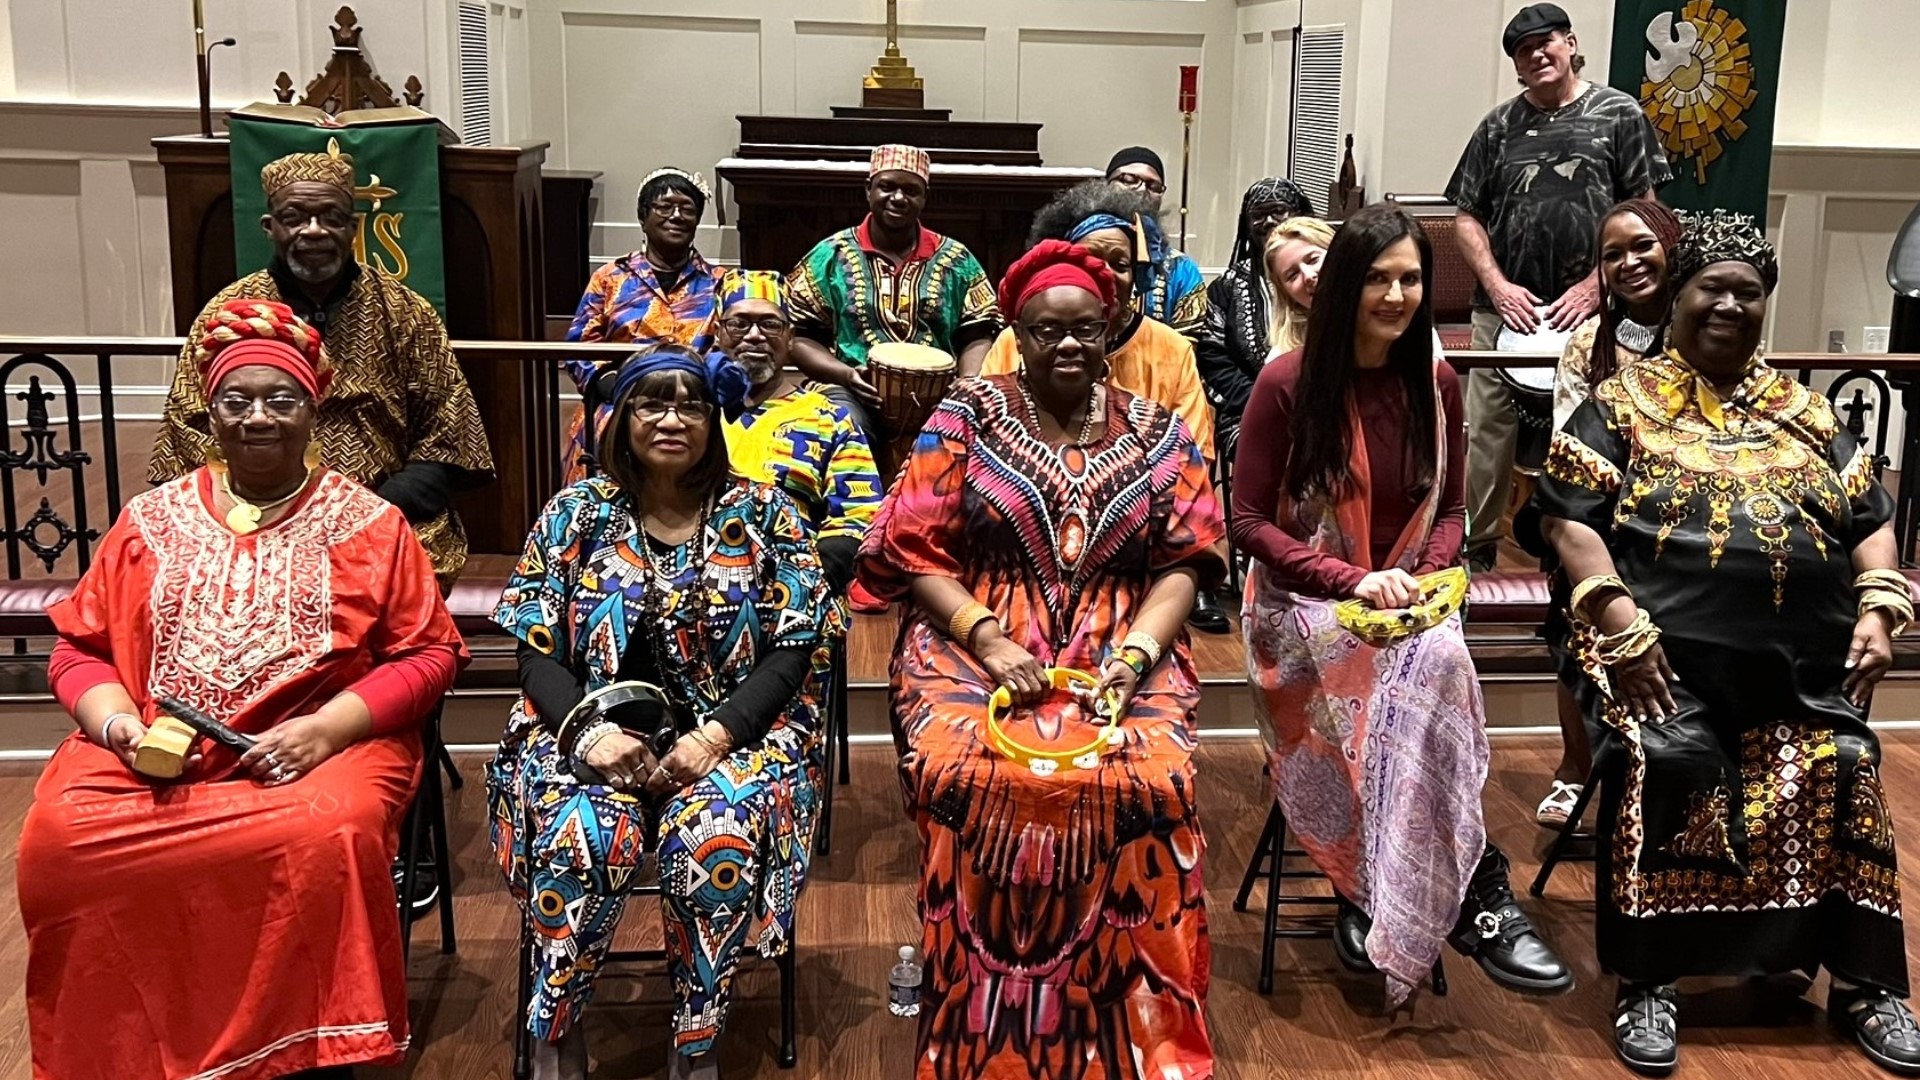 The story the group tells is a tale of slavery, pain and family but incredible joy, and they are spreading that message across the city of Charleston.